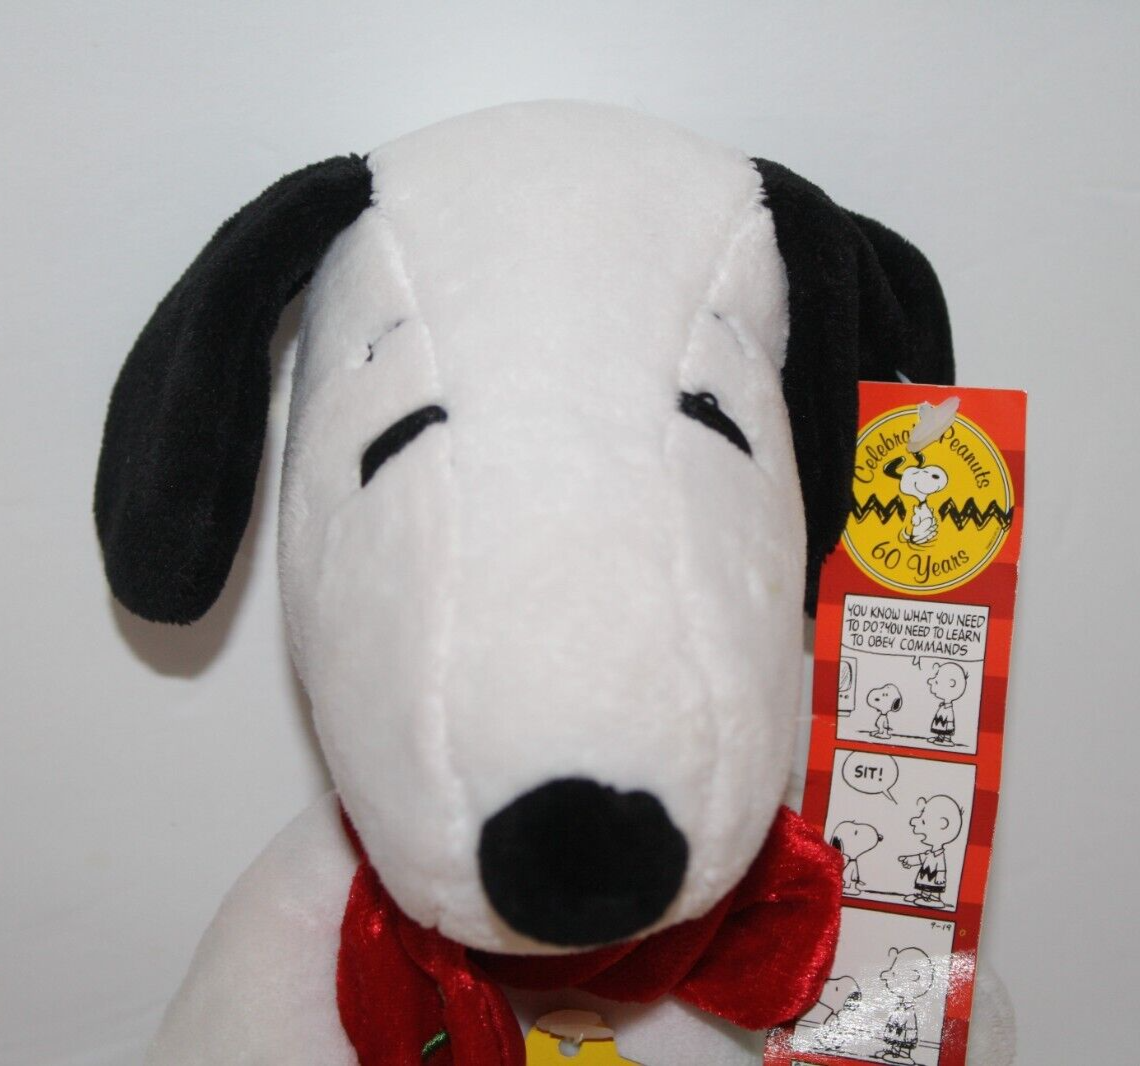 Peanuts Snoopy Plush Celebrate 60 Years 8" 1980s Christmas Lights Scarf Toy 2009 - $12.60